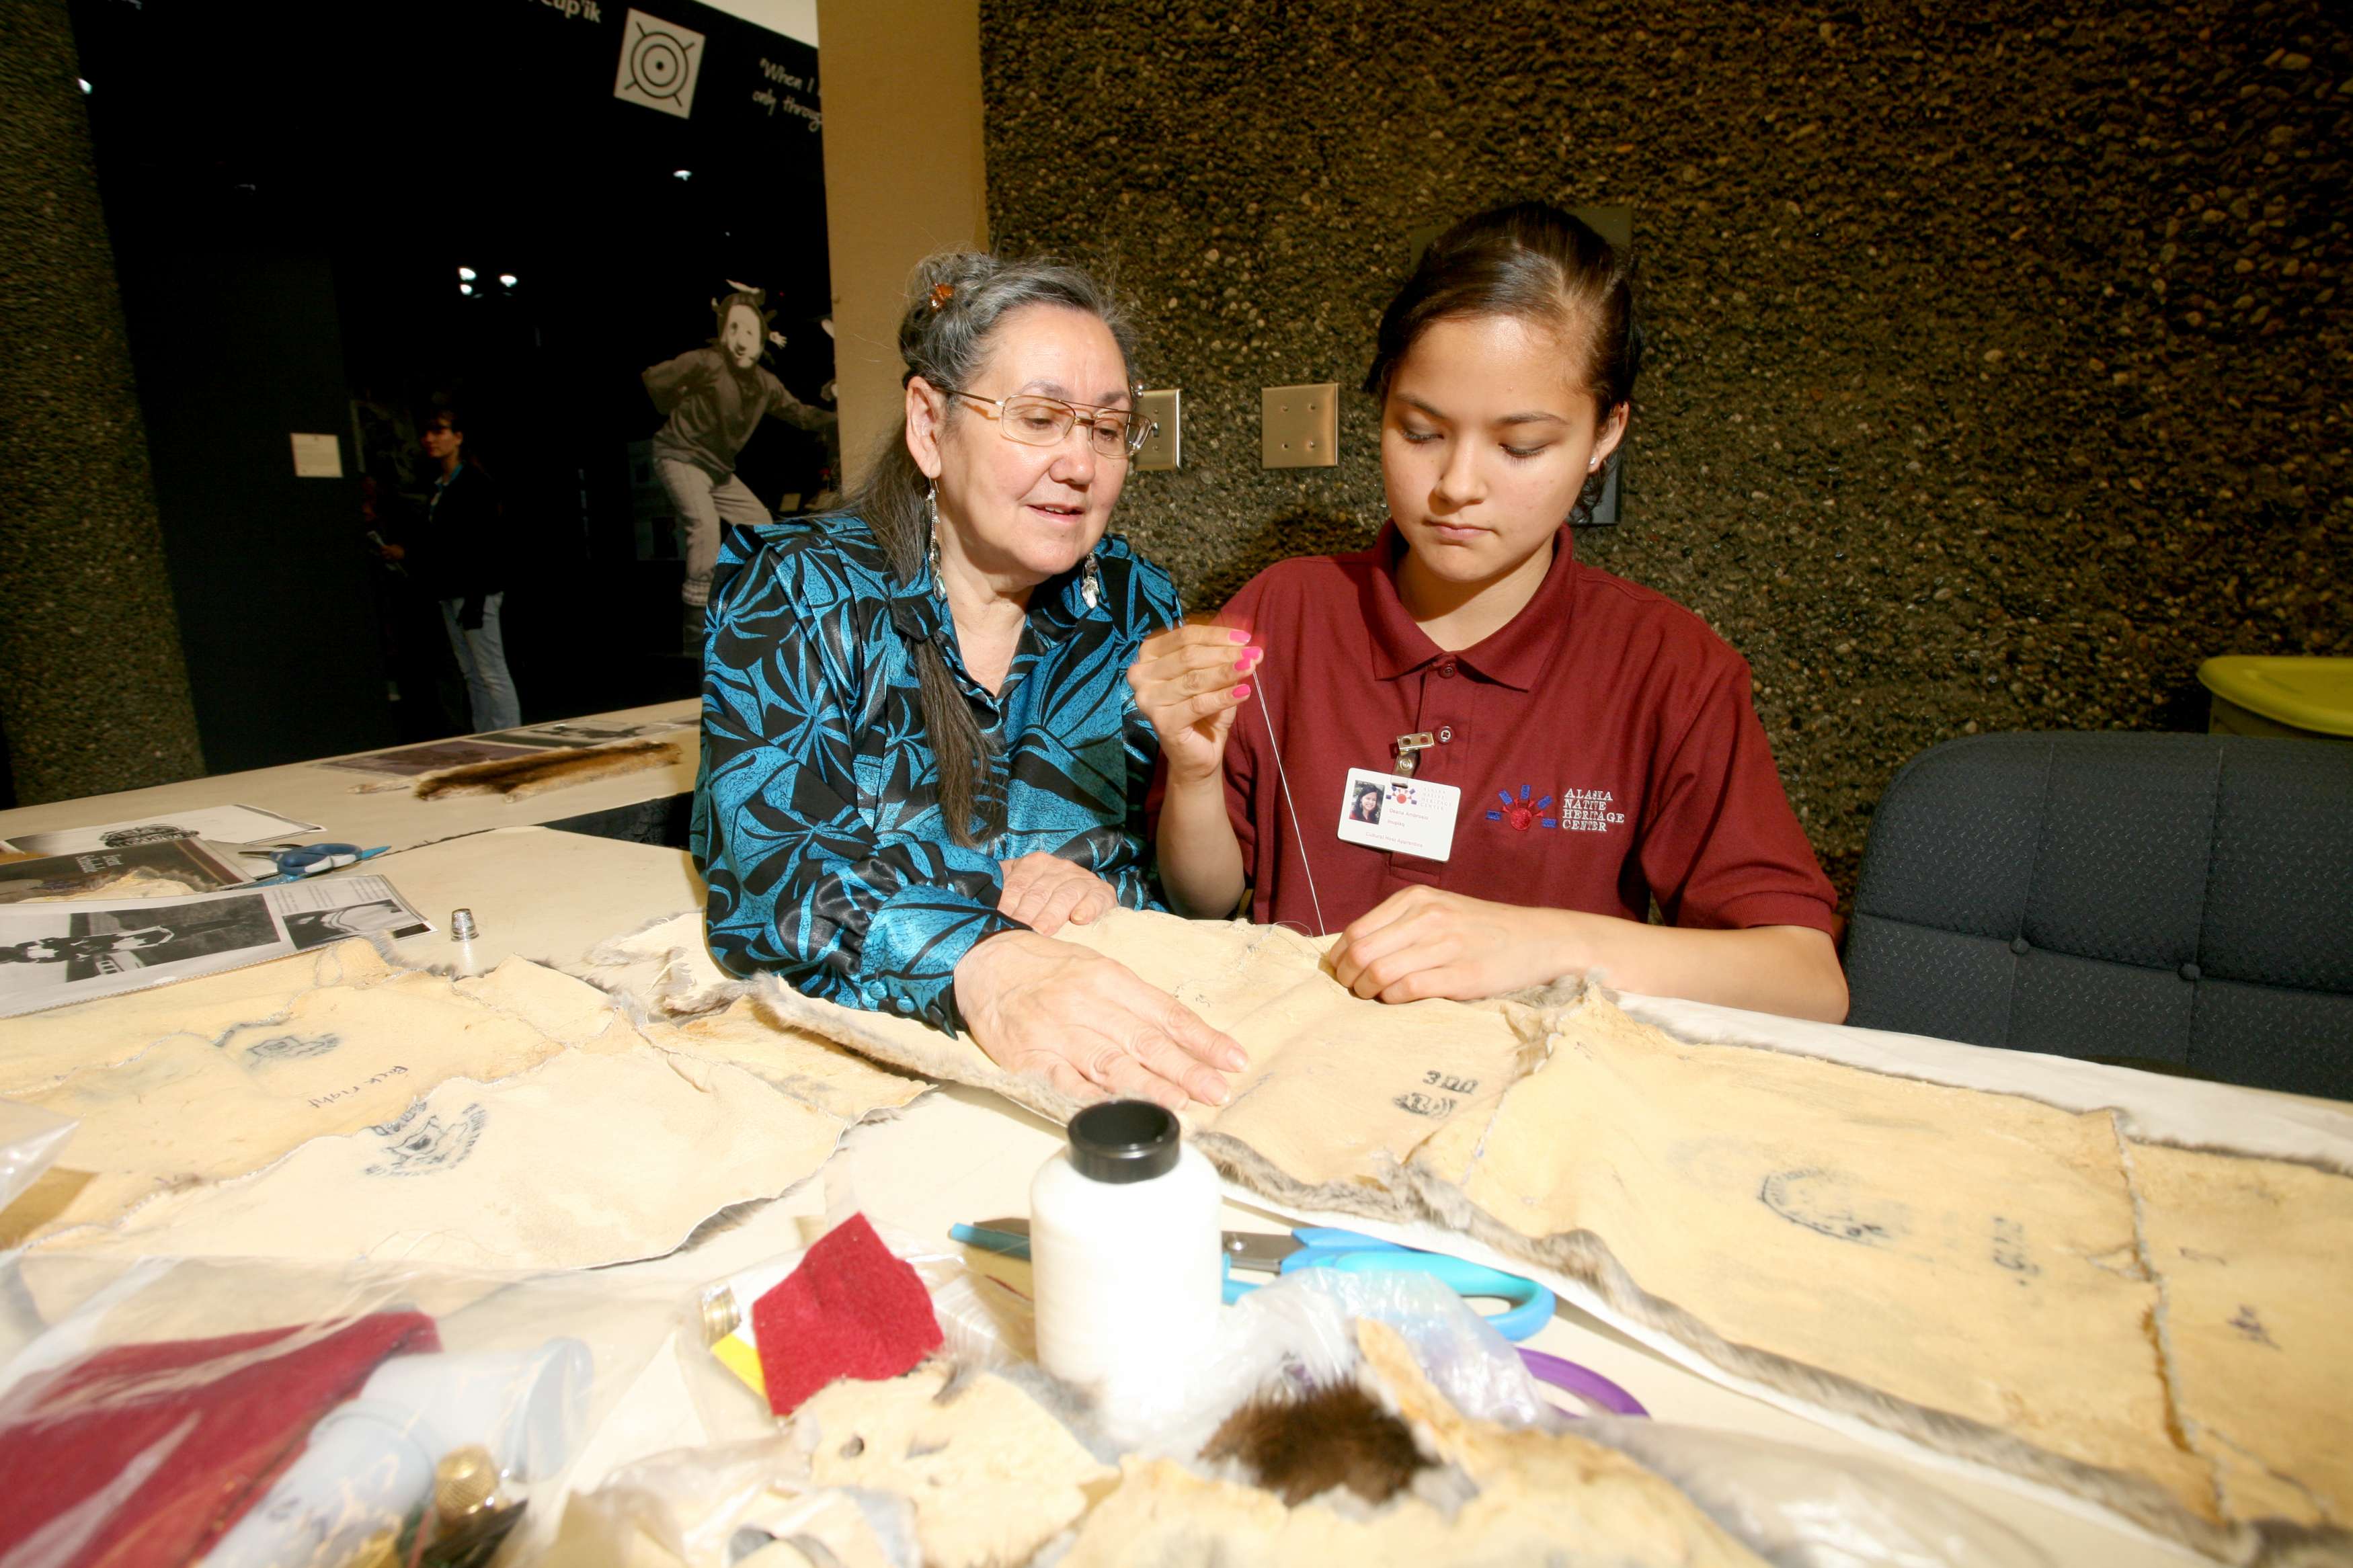 A woman helps a young girl make traditional Native art using a thread and needle.